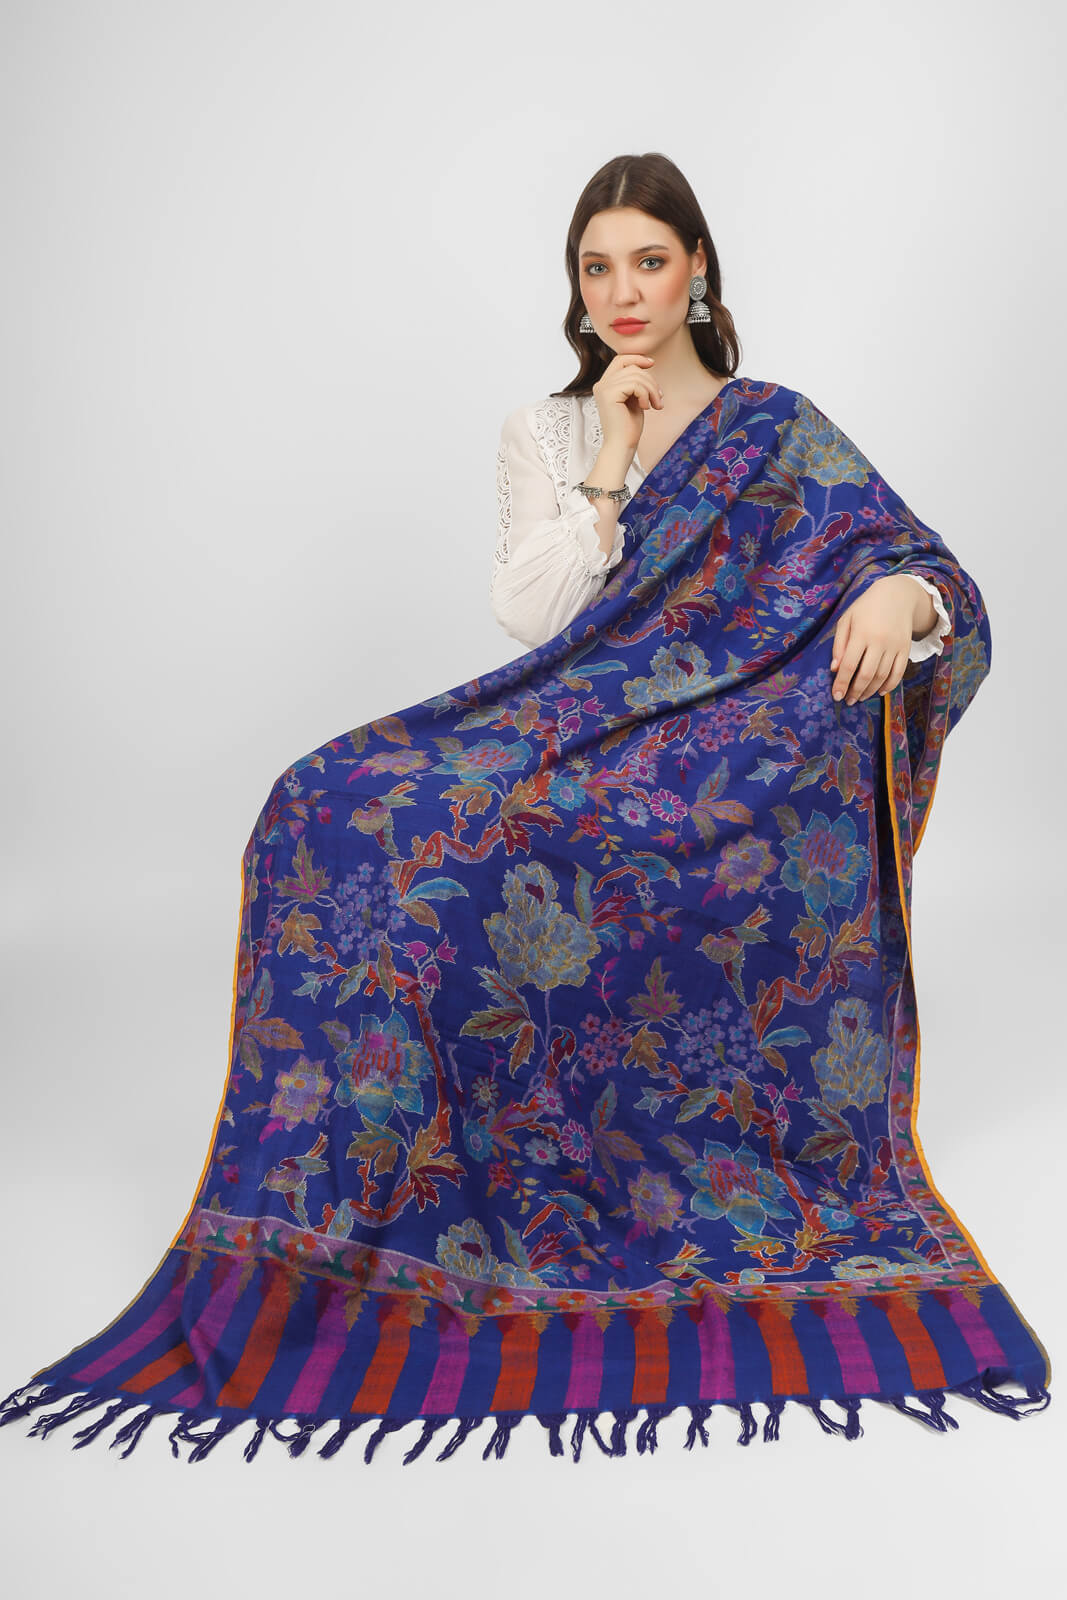 KANI SHAWLS - "This stunning royal blue Kani shawl features a big floral design that is both intricate and eye-catching. Expertly crafted by skilled artisans".you can order from DELHI, DUBAI, LONDON .